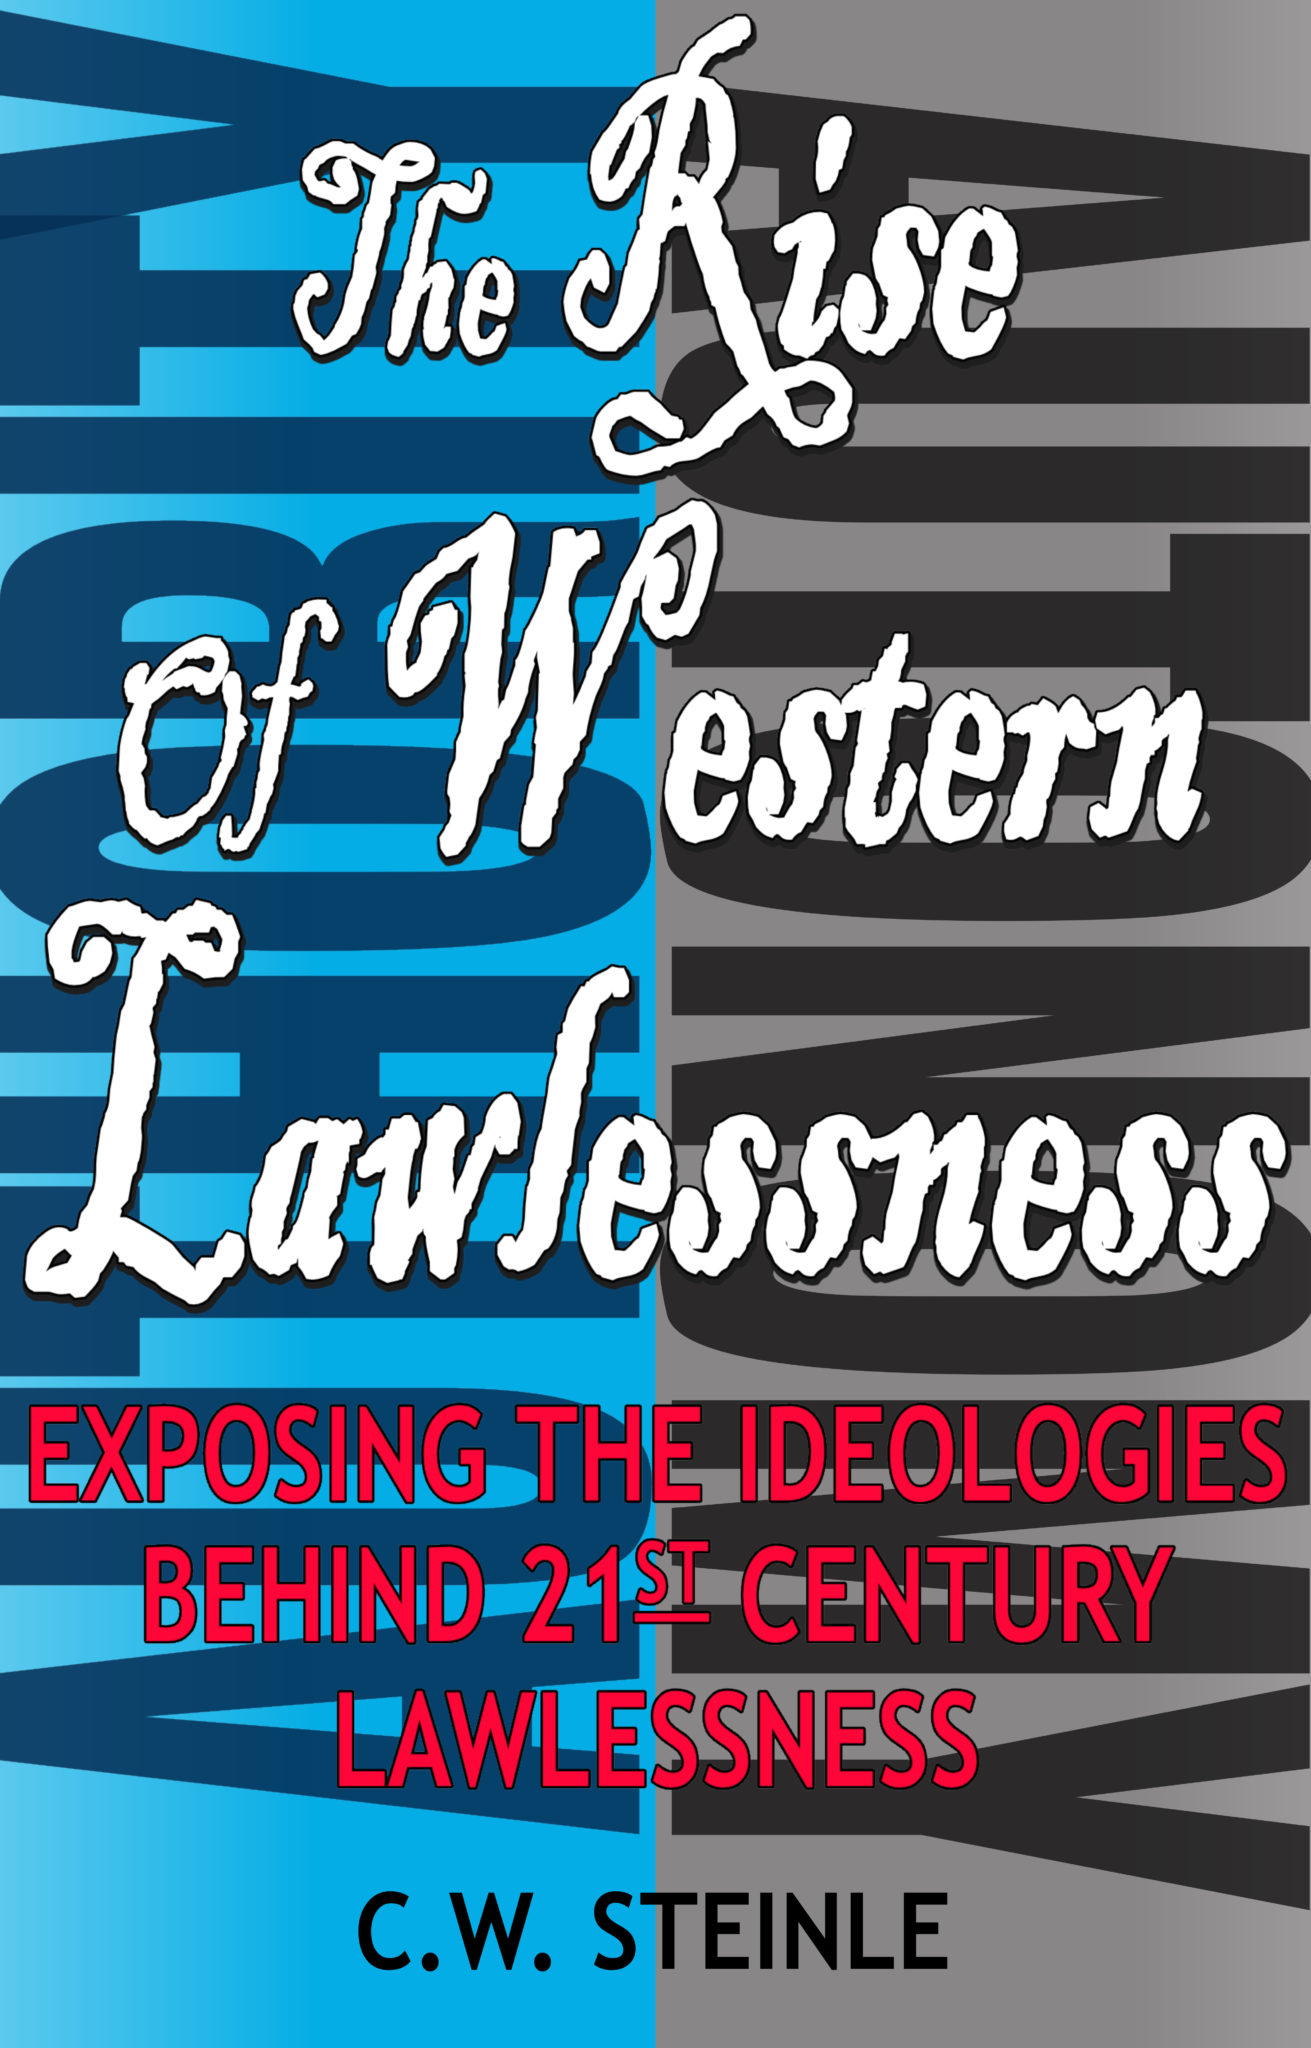 FREE: The Rise of Western Lawlessness: Exposing the Ideologies Behind 21st Century Lawlessness by C.W. Steinle